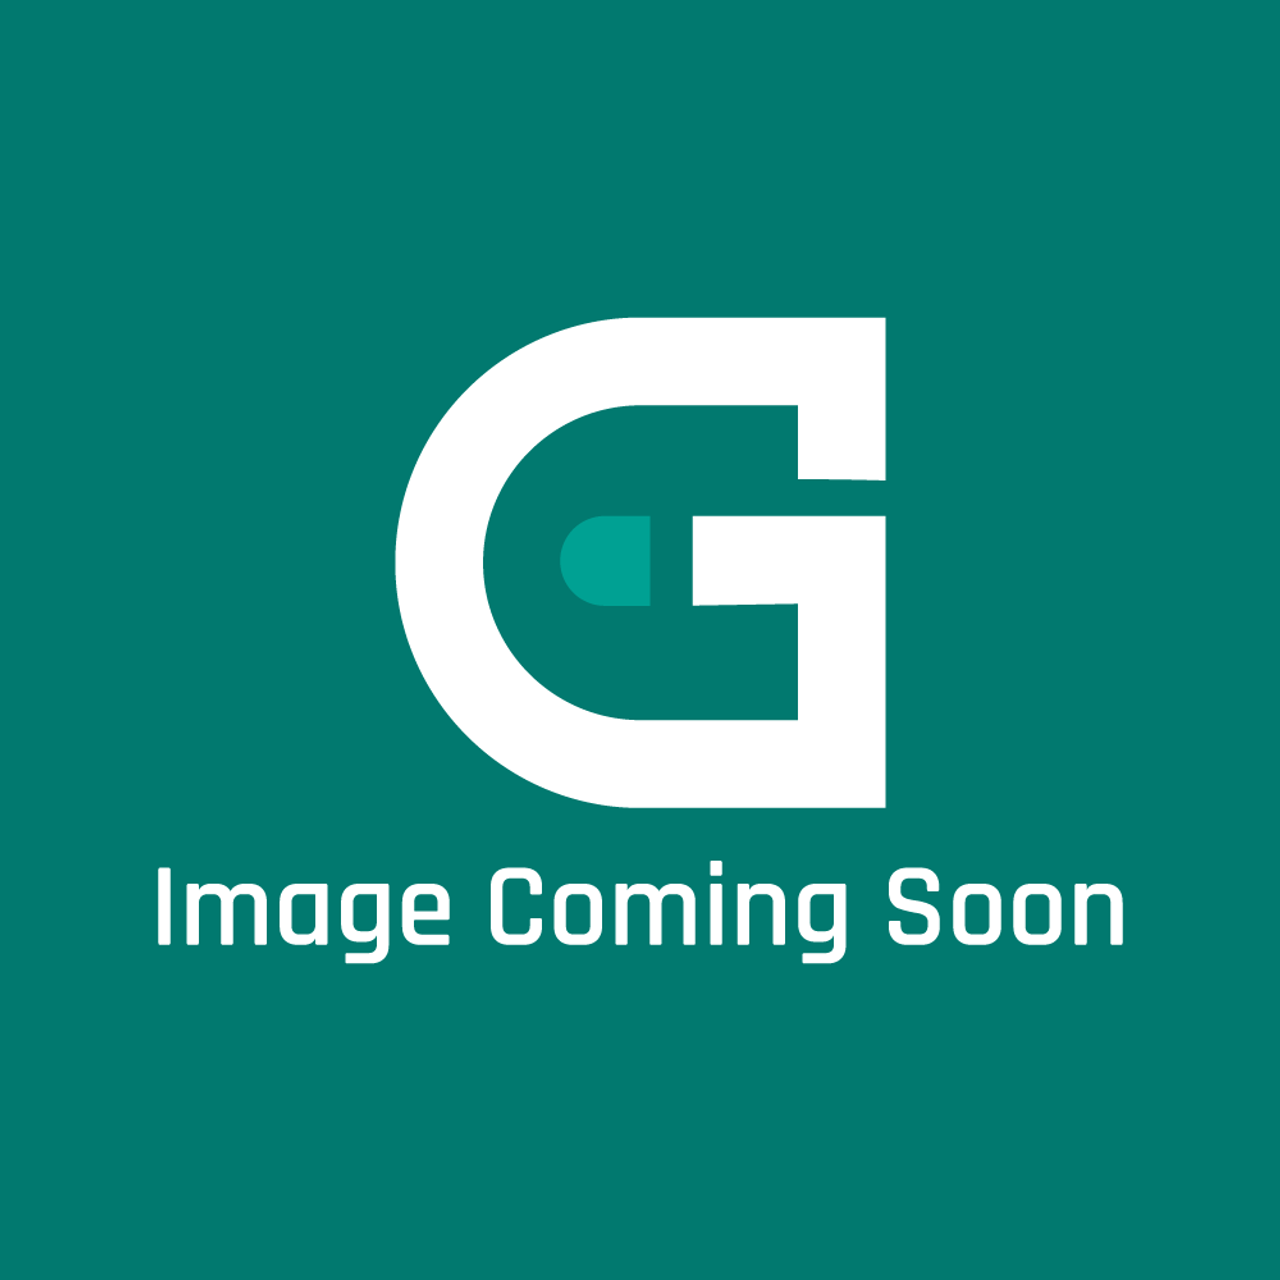 Frigidaire - Electrolux 316557120 Clock - Image Coming Soon!